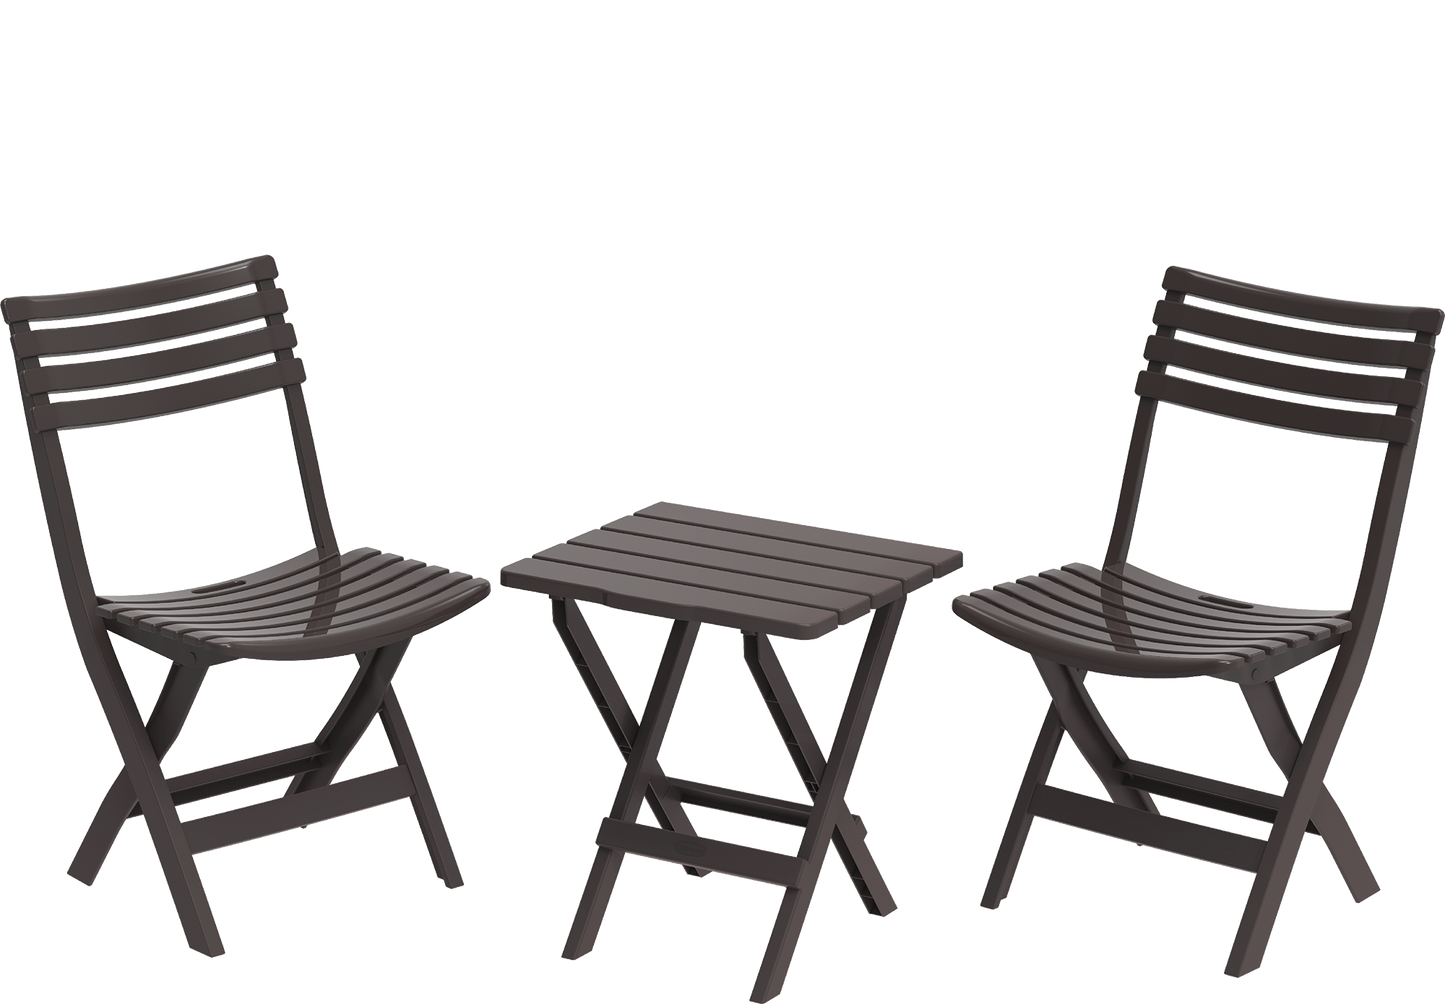 Portable Camping Folding Chair & Table Set - Cosmoplast Bahrain